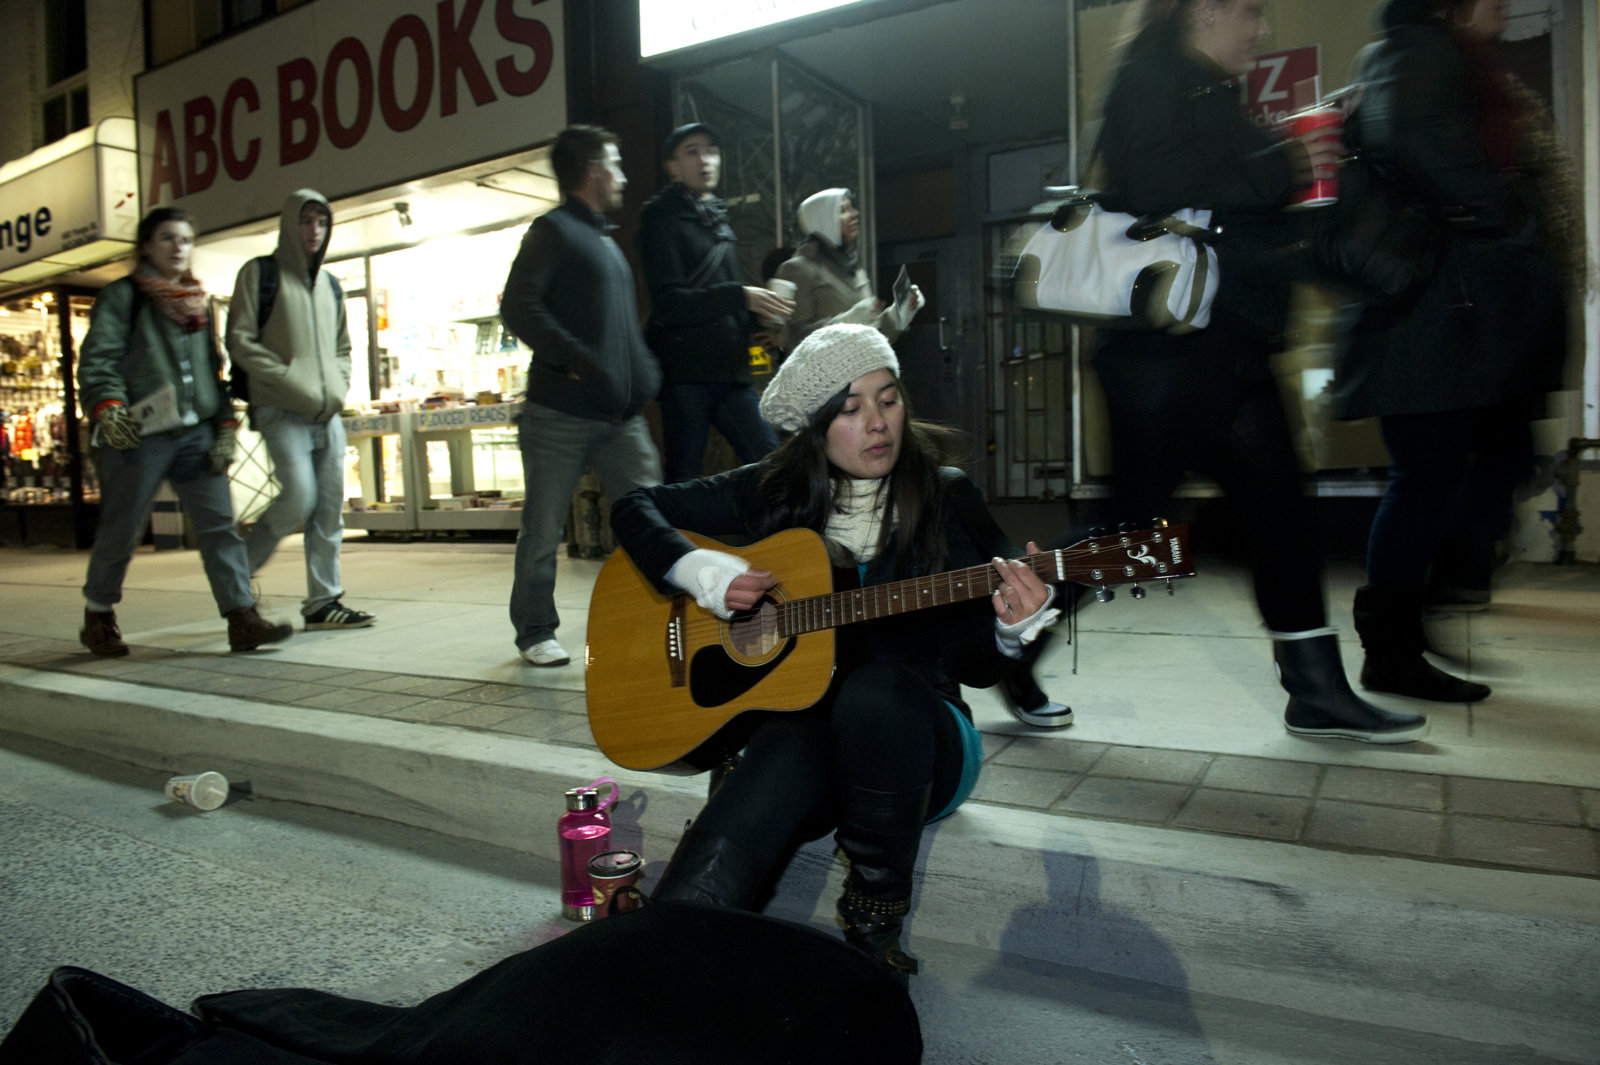 Kevin Schmidt, Will You Love Me Tomorrow?, 2011, performance, 12 hours. Documentation, Nuit Blanche, Toronto, 2011